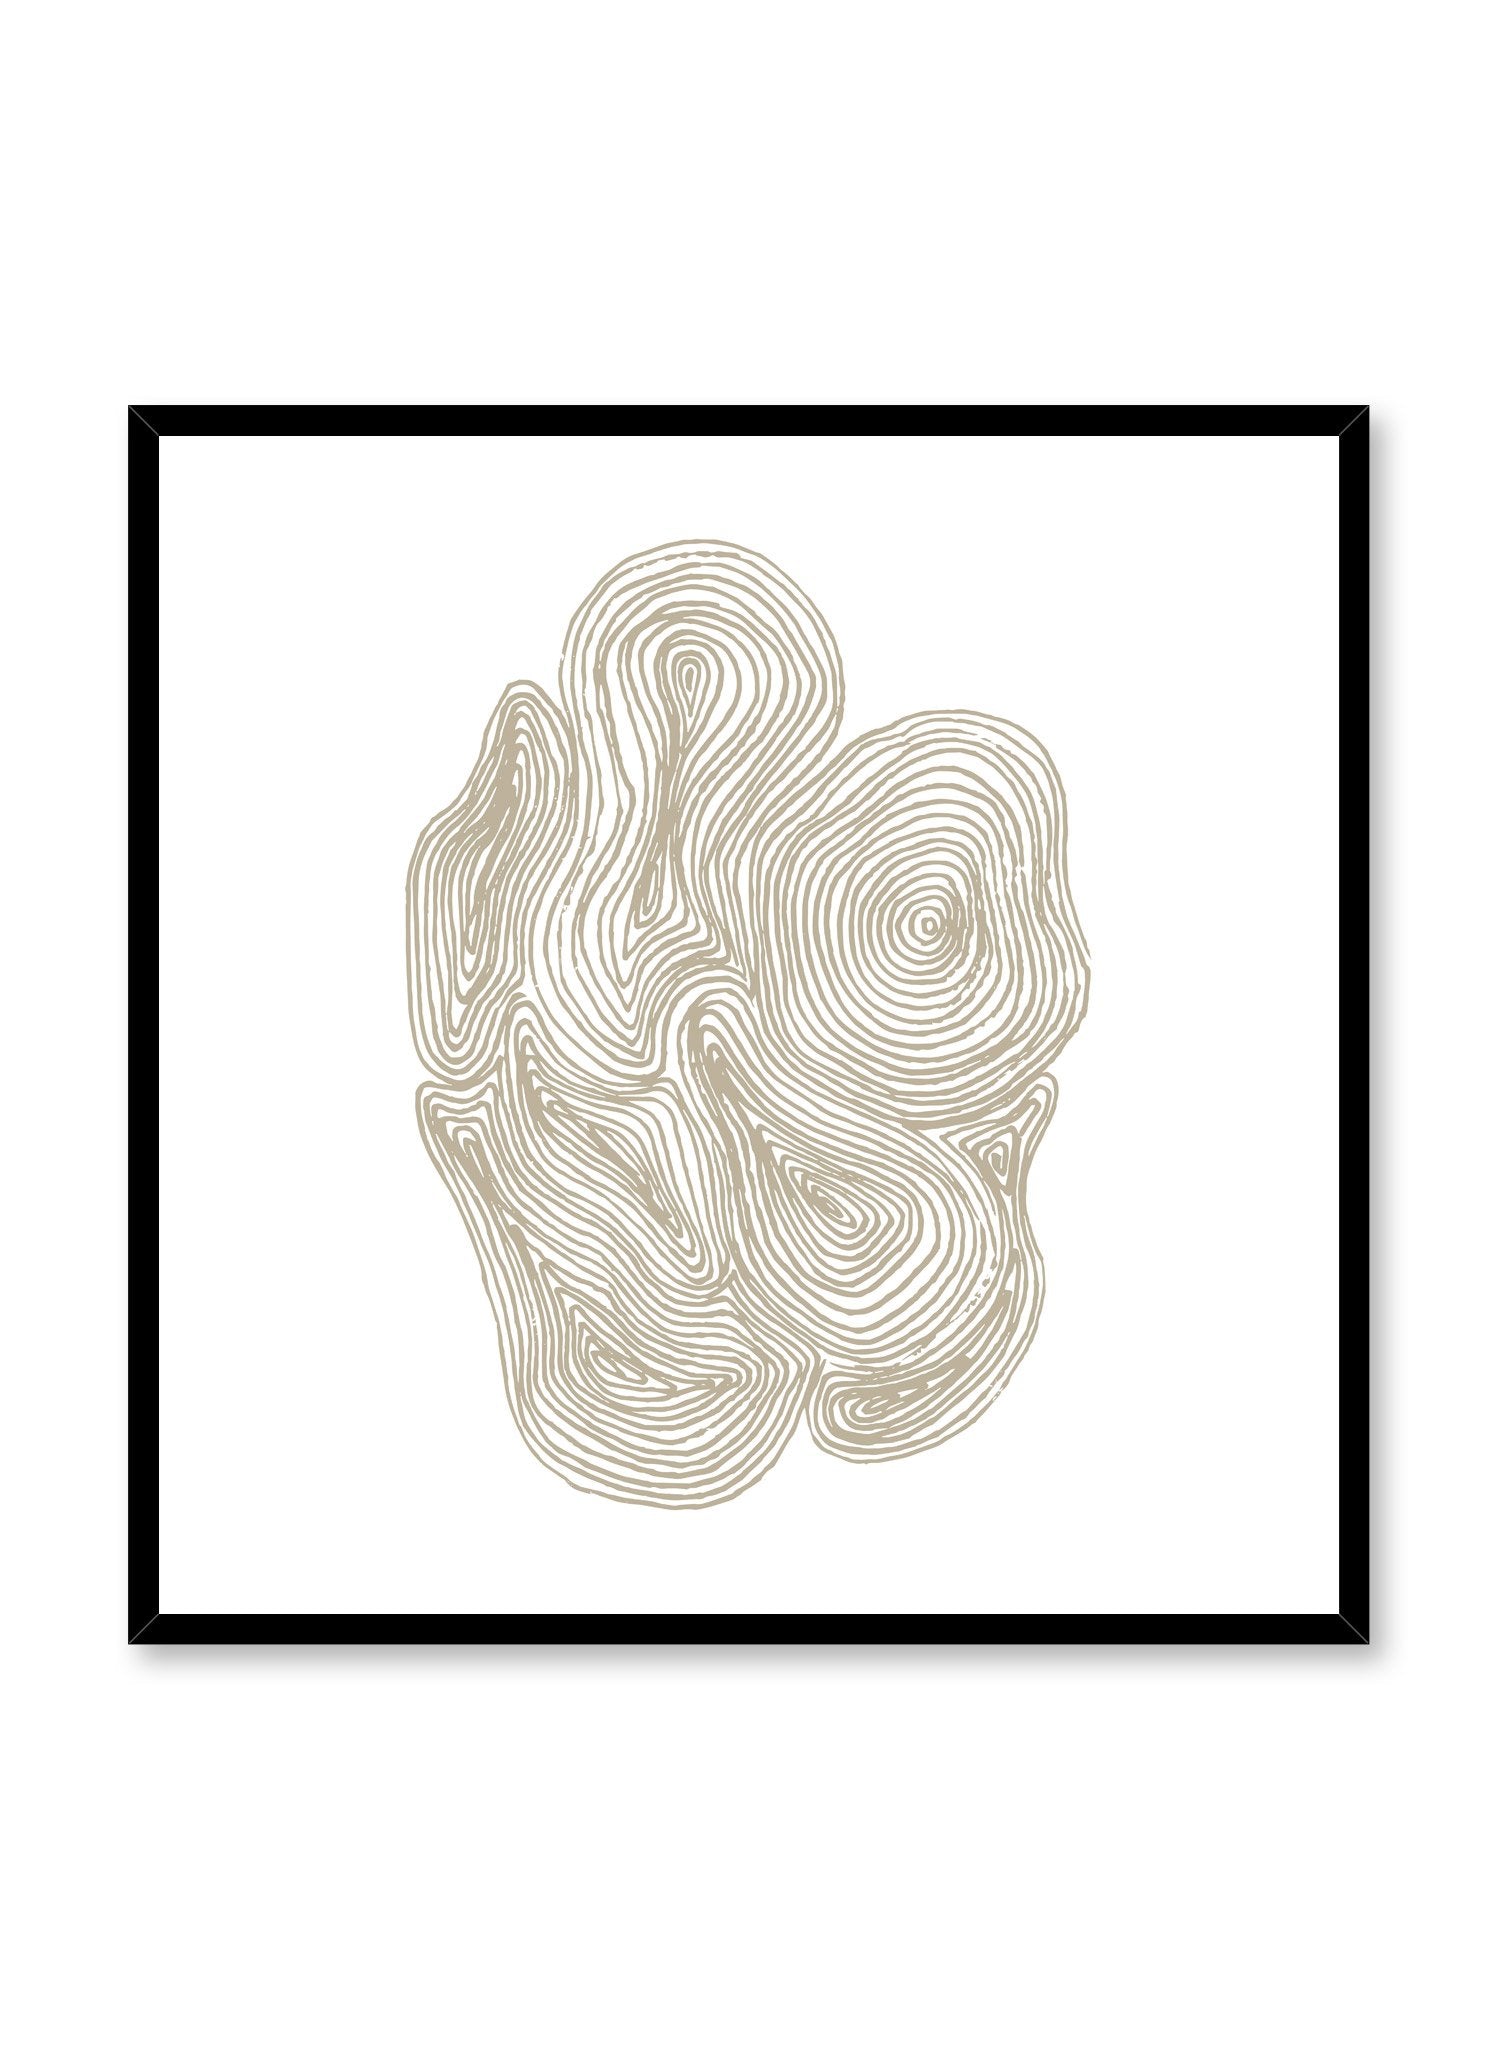 Scandinavian poster by Opposite Wall with hand-made art design with cluster of swirls design in square format